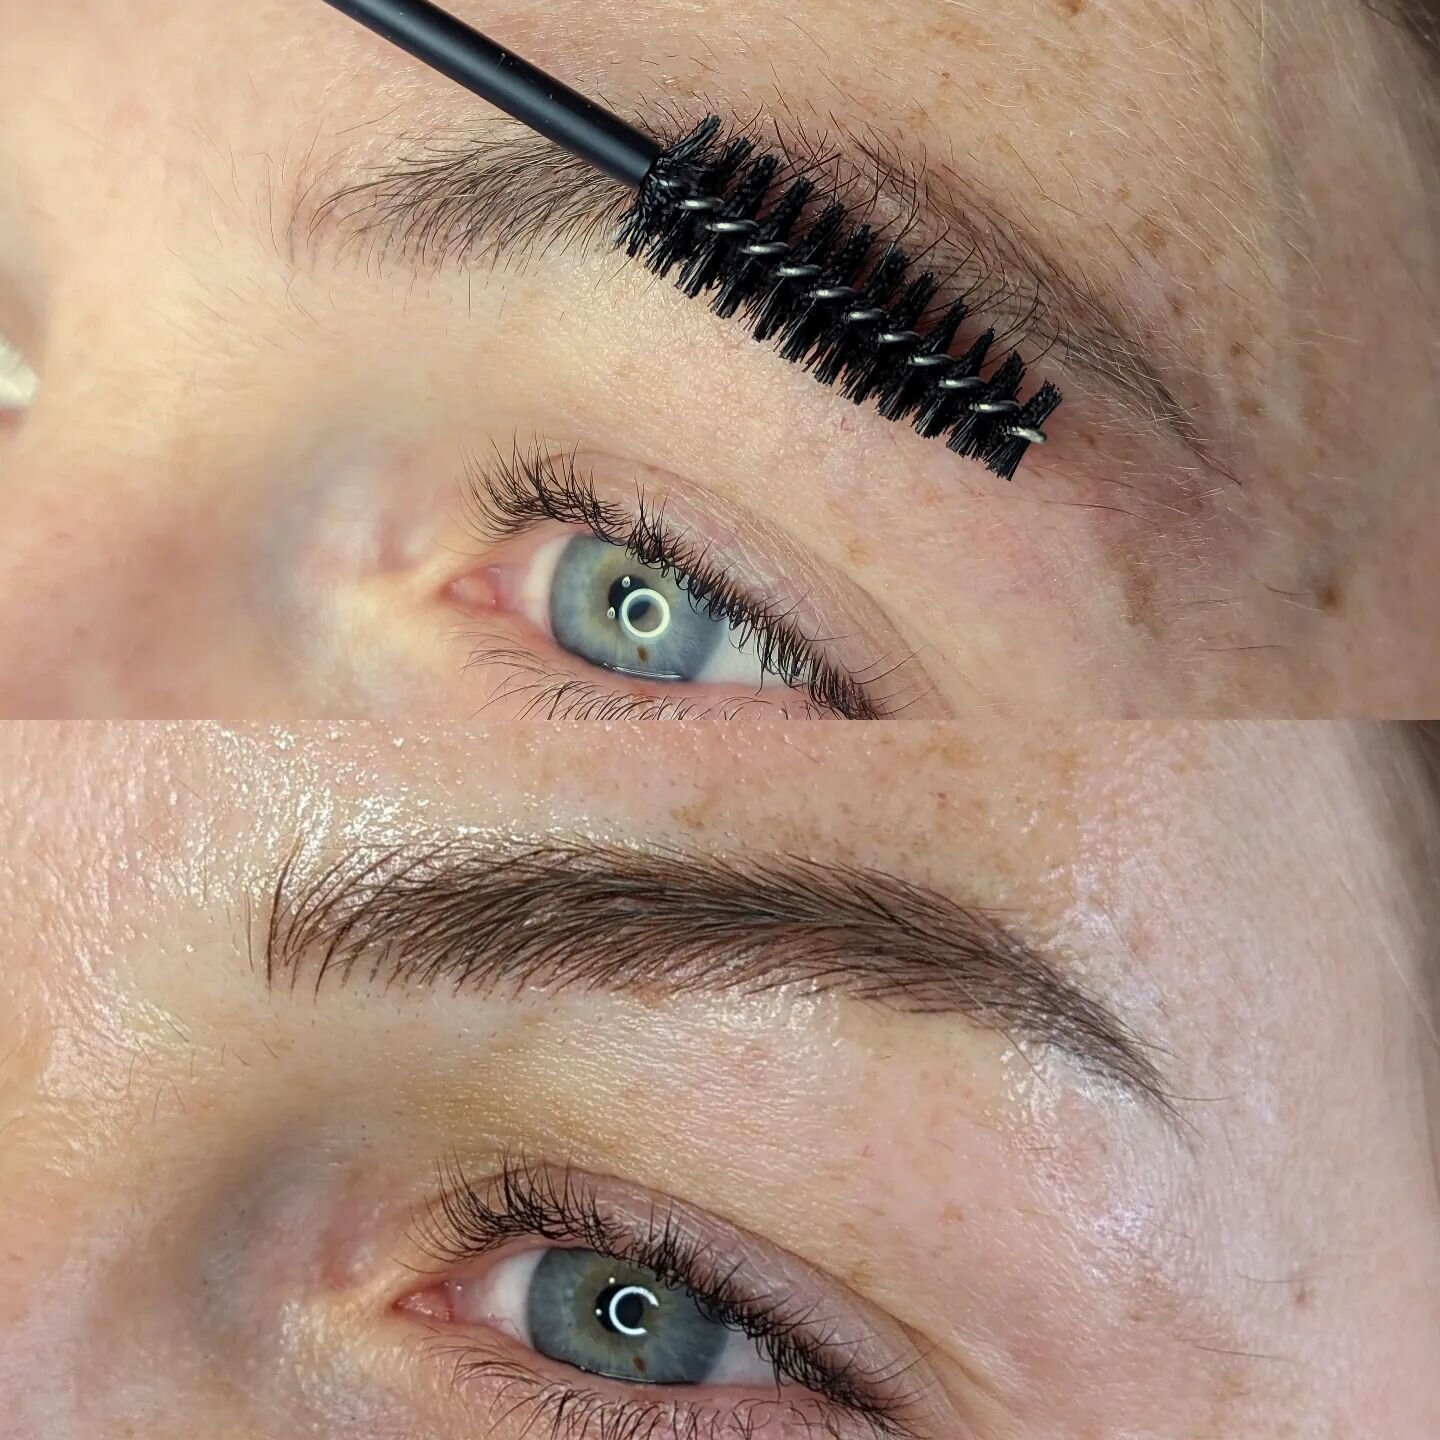 Top- healed feather brows before touch up, bottom- right after touch up. 
Not sure what is best for your skin type? DM or book a consultation. 😊